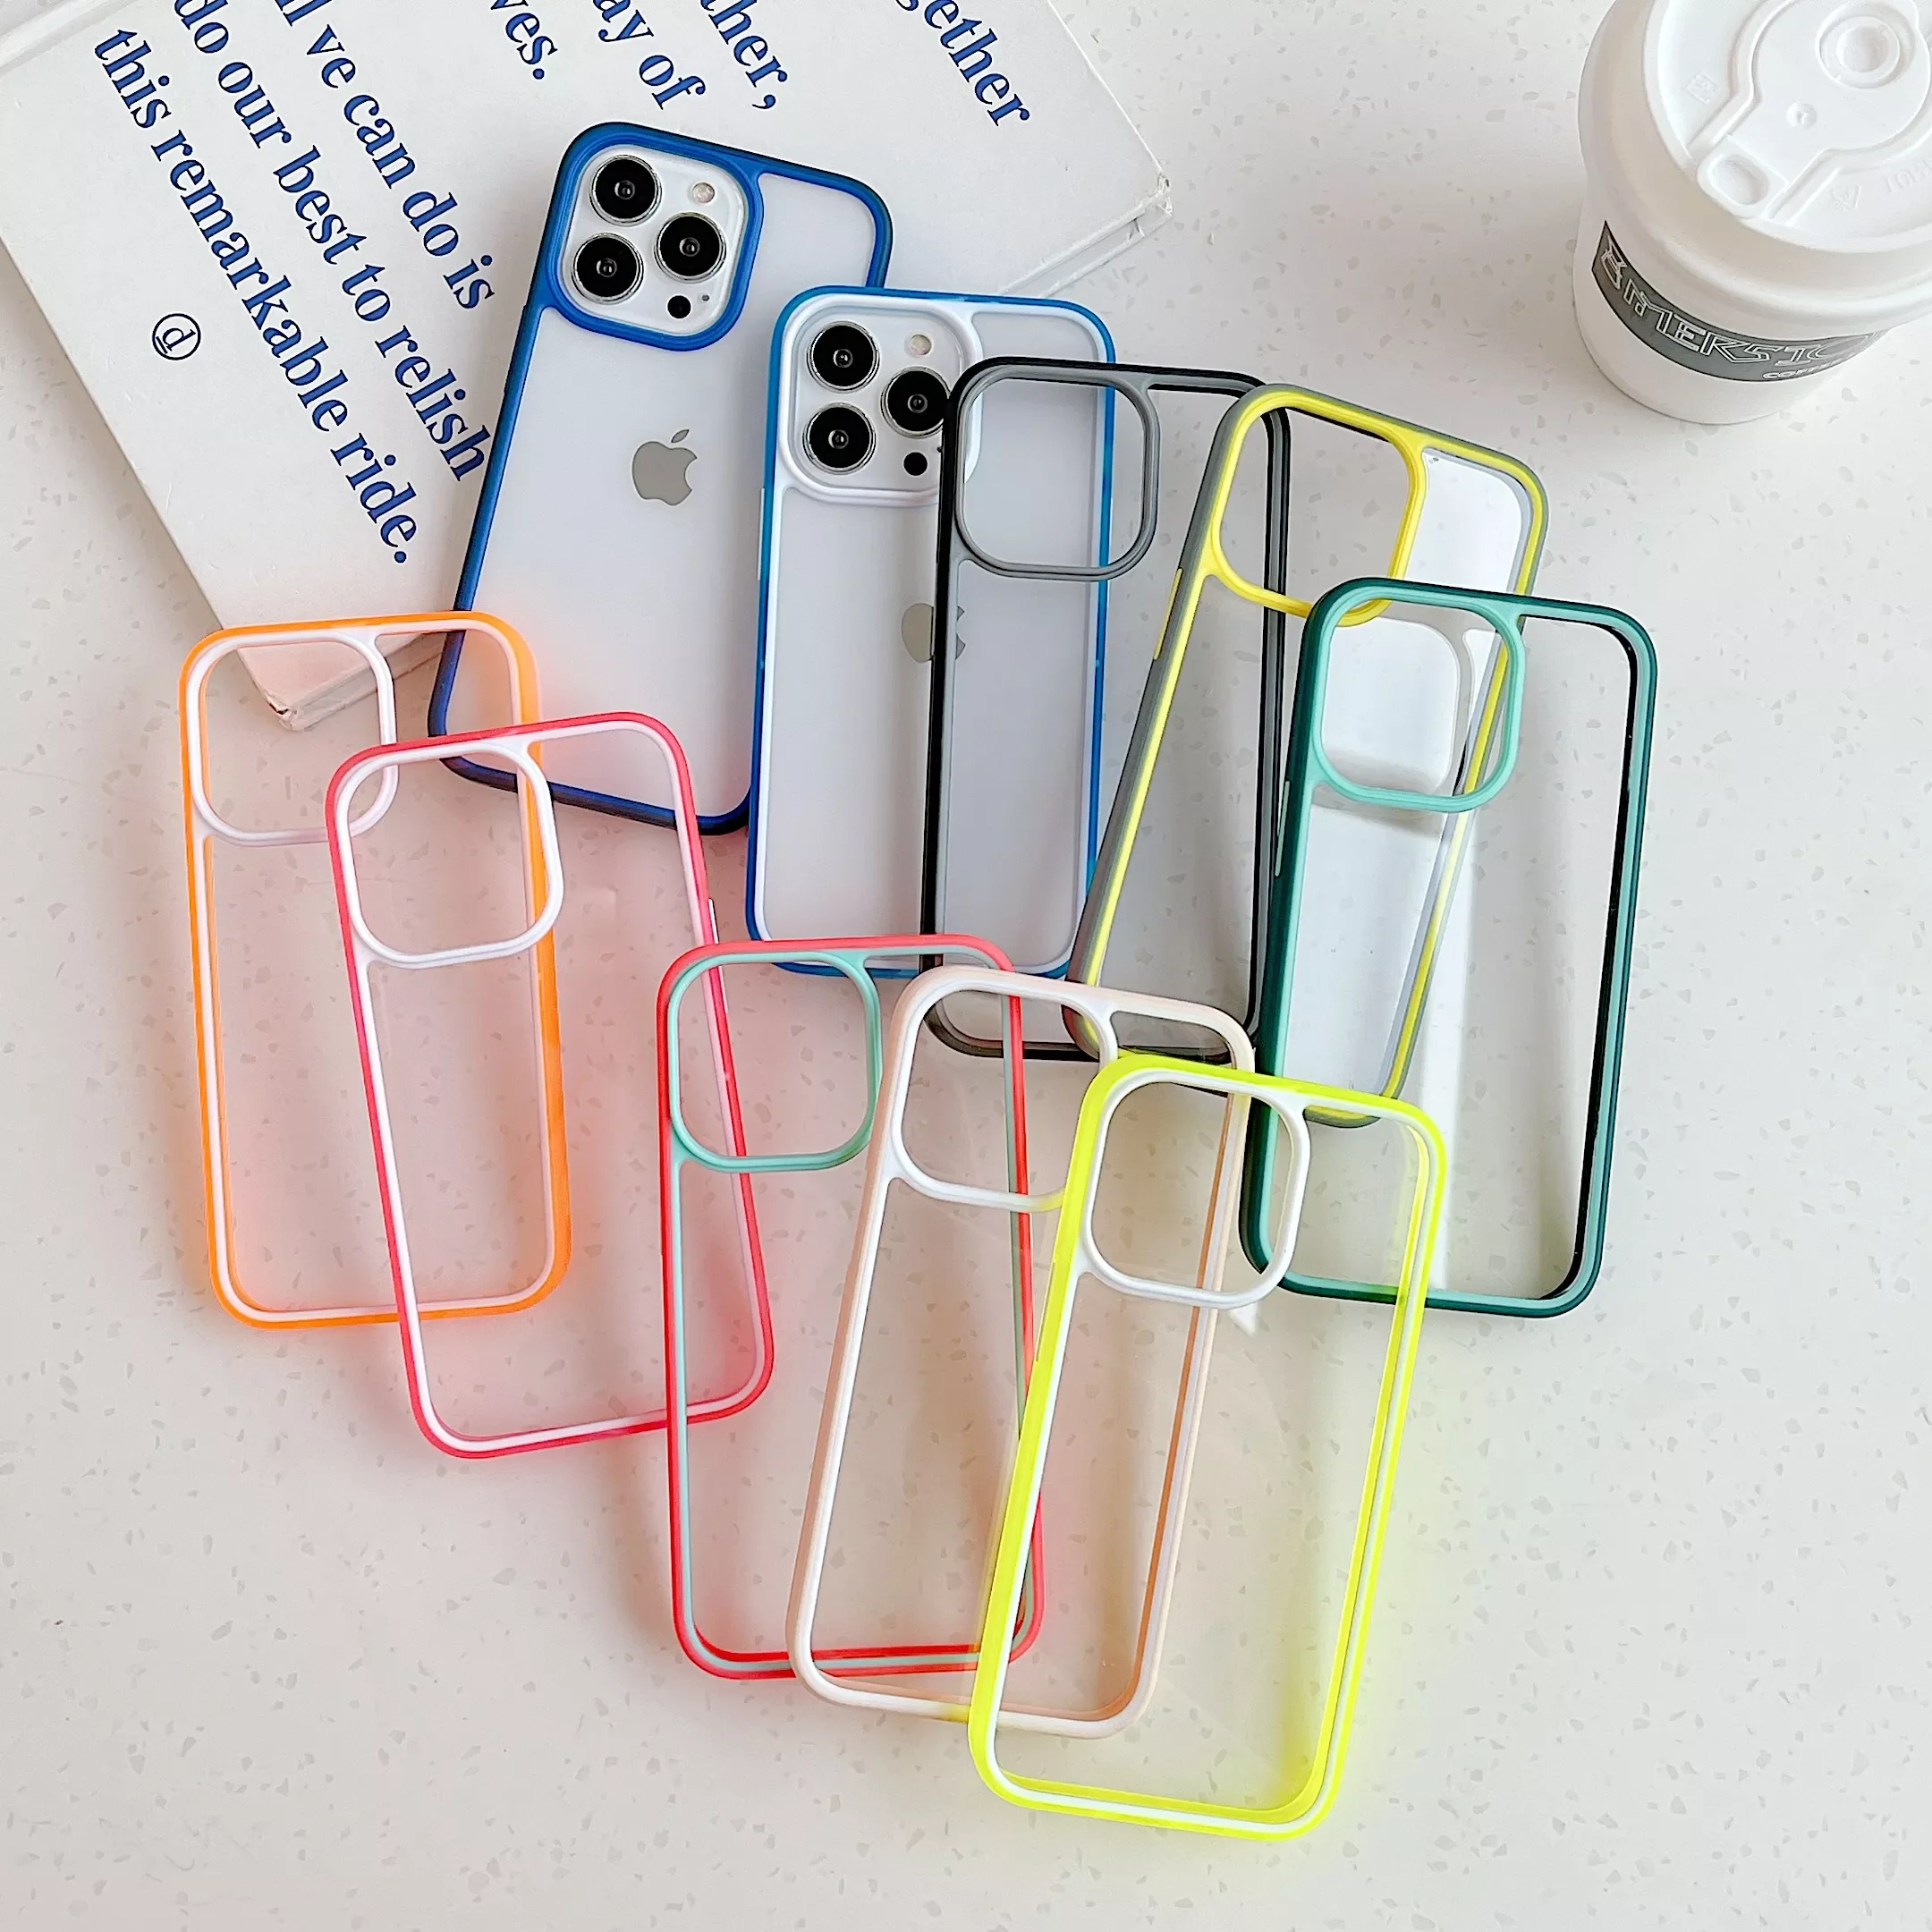 

New Arrival for iPhone 13 12 Mini 11 Pro Max X XR XS 7 8 Plus SE2 Silicon Bumper Clear Cover Neon Colorful Frame Shockproof Case